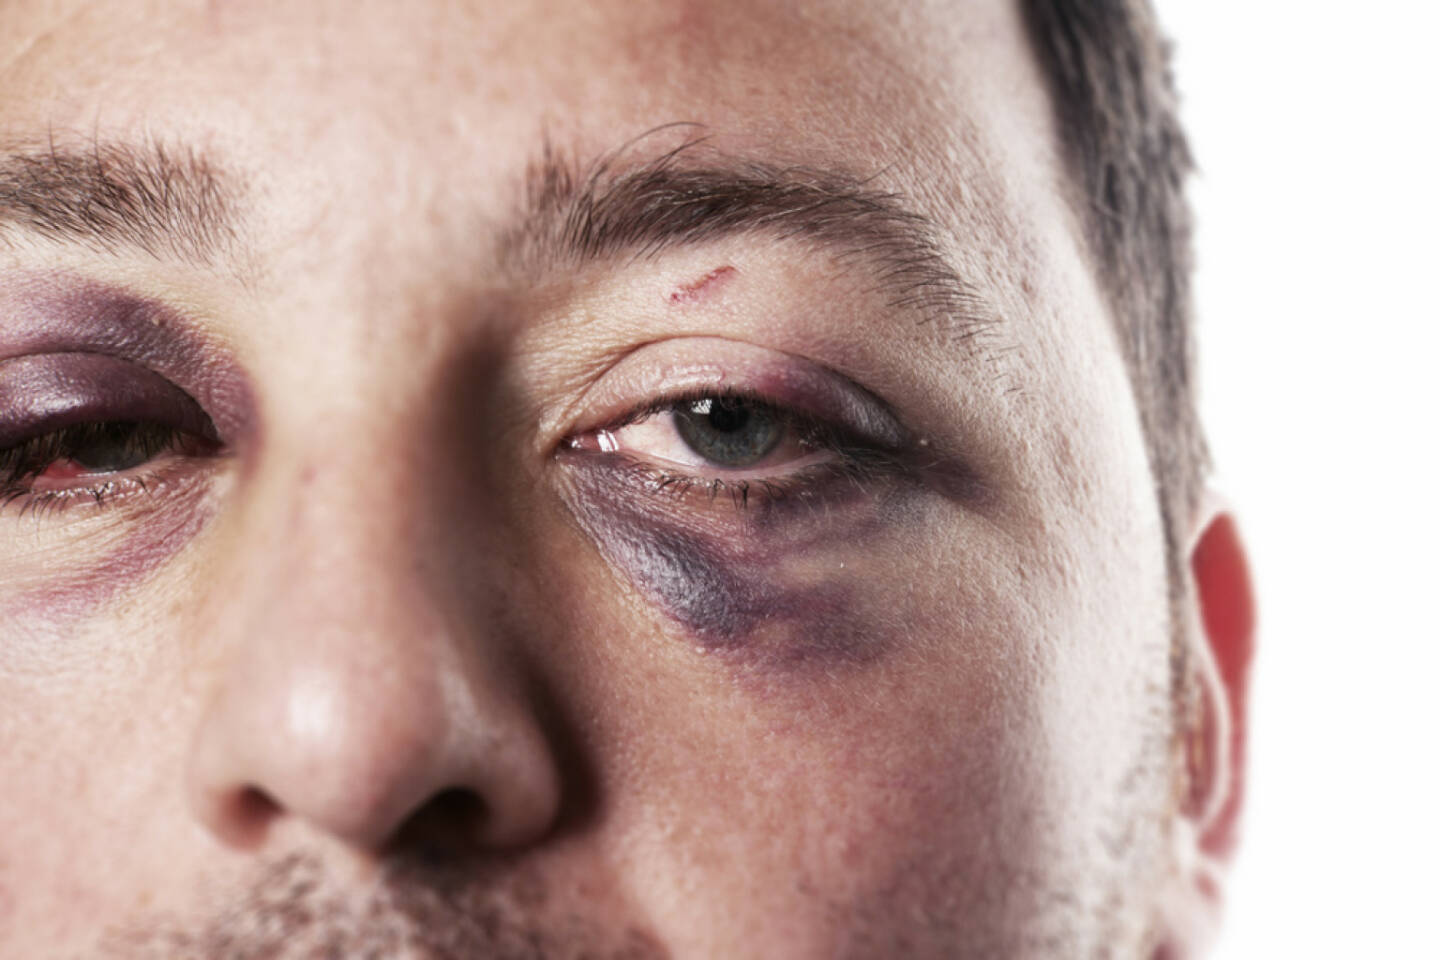 blaues Auge, Auge, Schmerz, davonkommen, crash, Unfall, verletzt, aua, http://www.shutterstock.com/de/pic-106680602/stock-photo-eye-injury-male-with-black-eye-isolated-on-white-man-after-accident-or-fight-with-bruise.html 